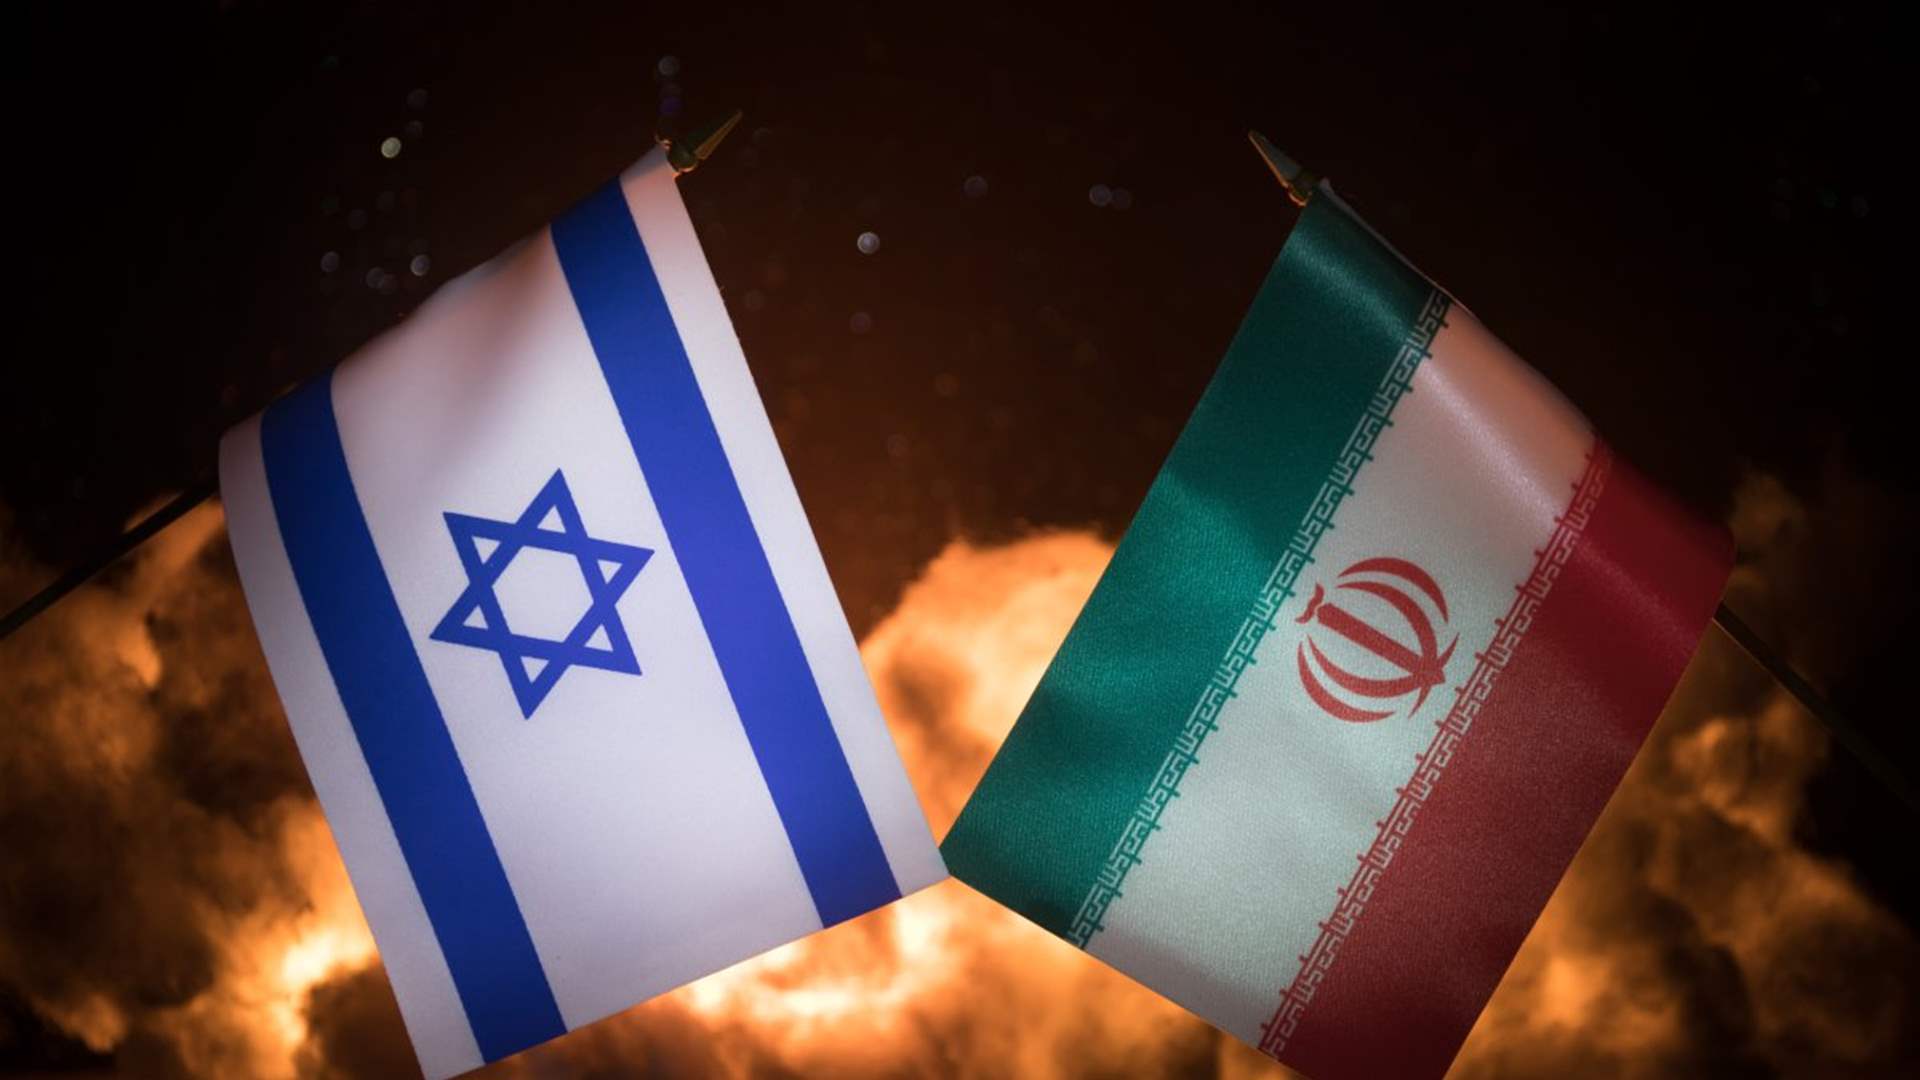 Middle East crisis: Israel explores response options to Iranian attack amid US pressure